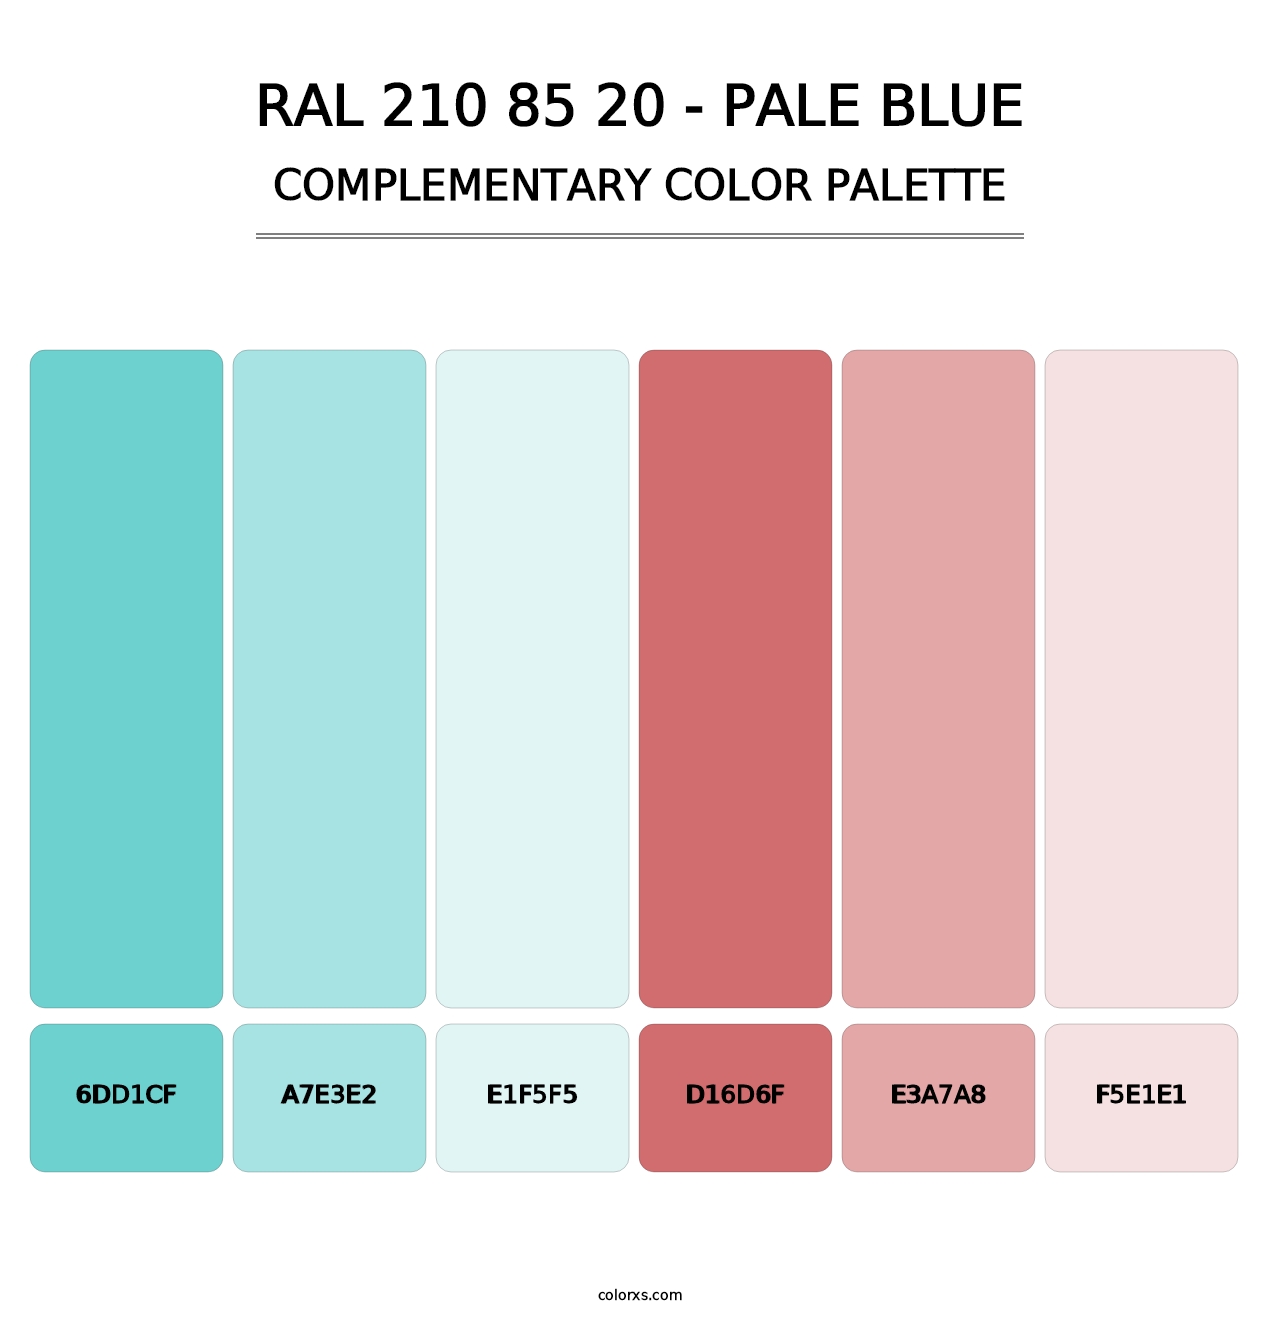 RAL 210 85 20 - Pale Blue - Complementary Color Palette